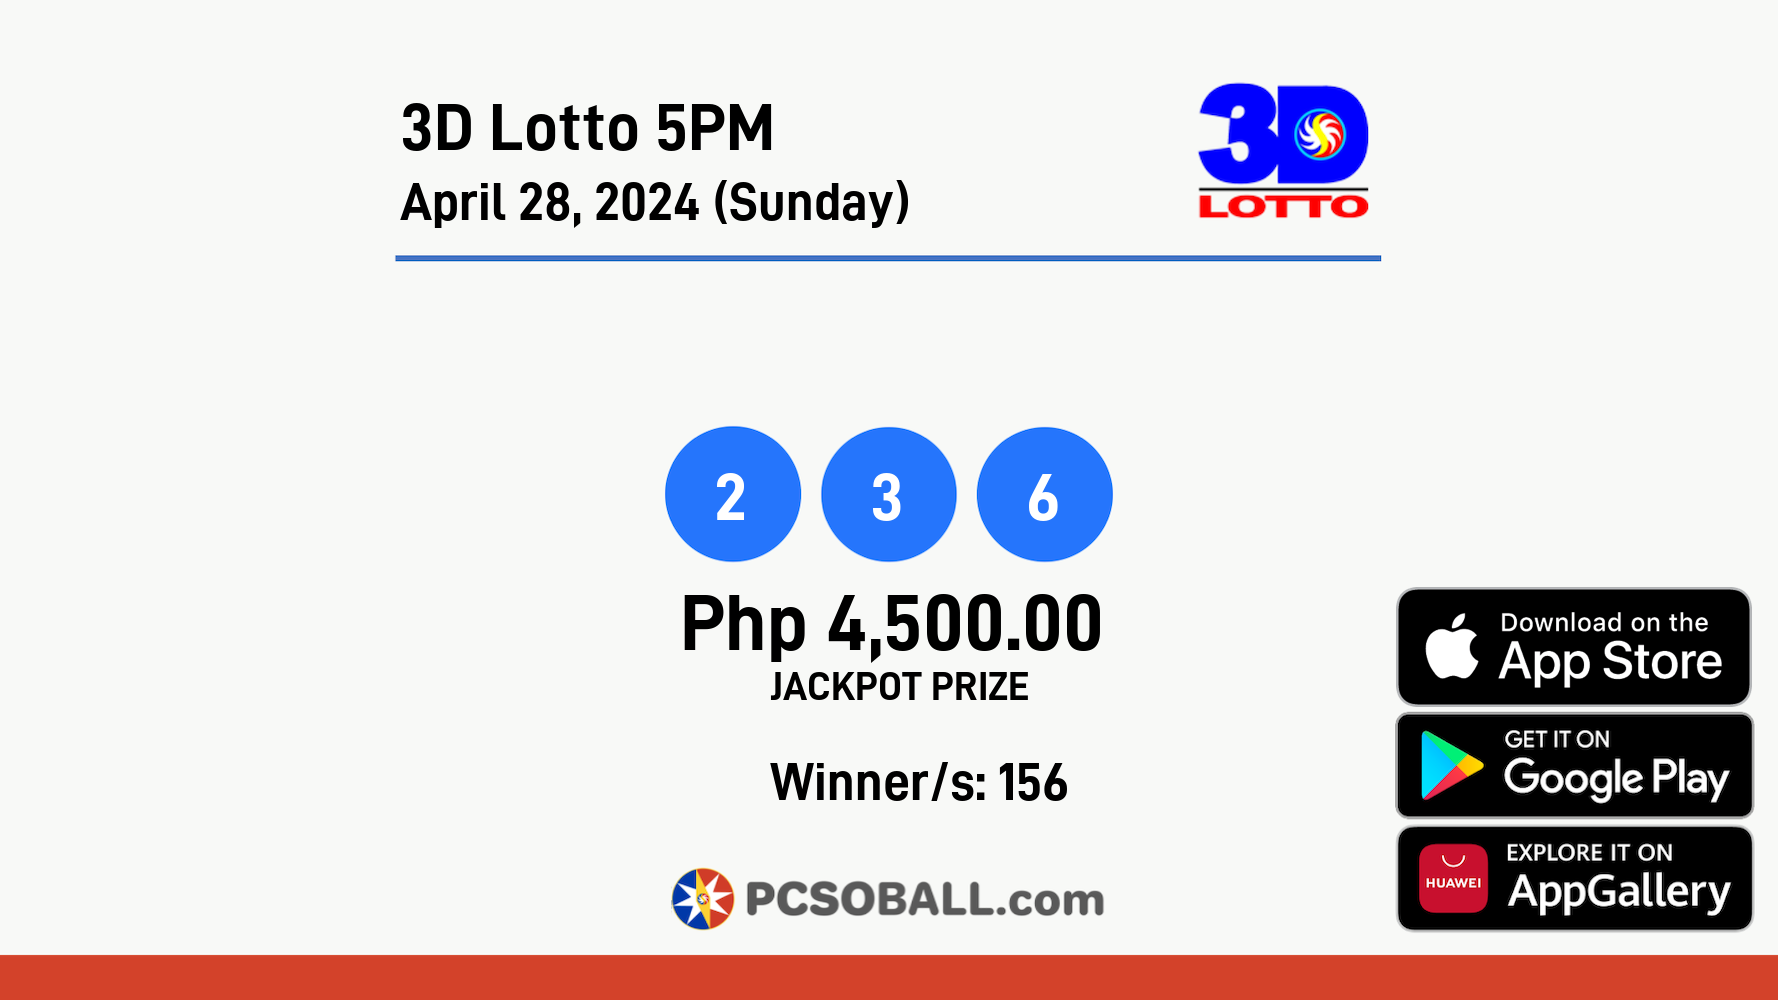 3D Lotto 5PM April 28, 2024 (Sunday) Result